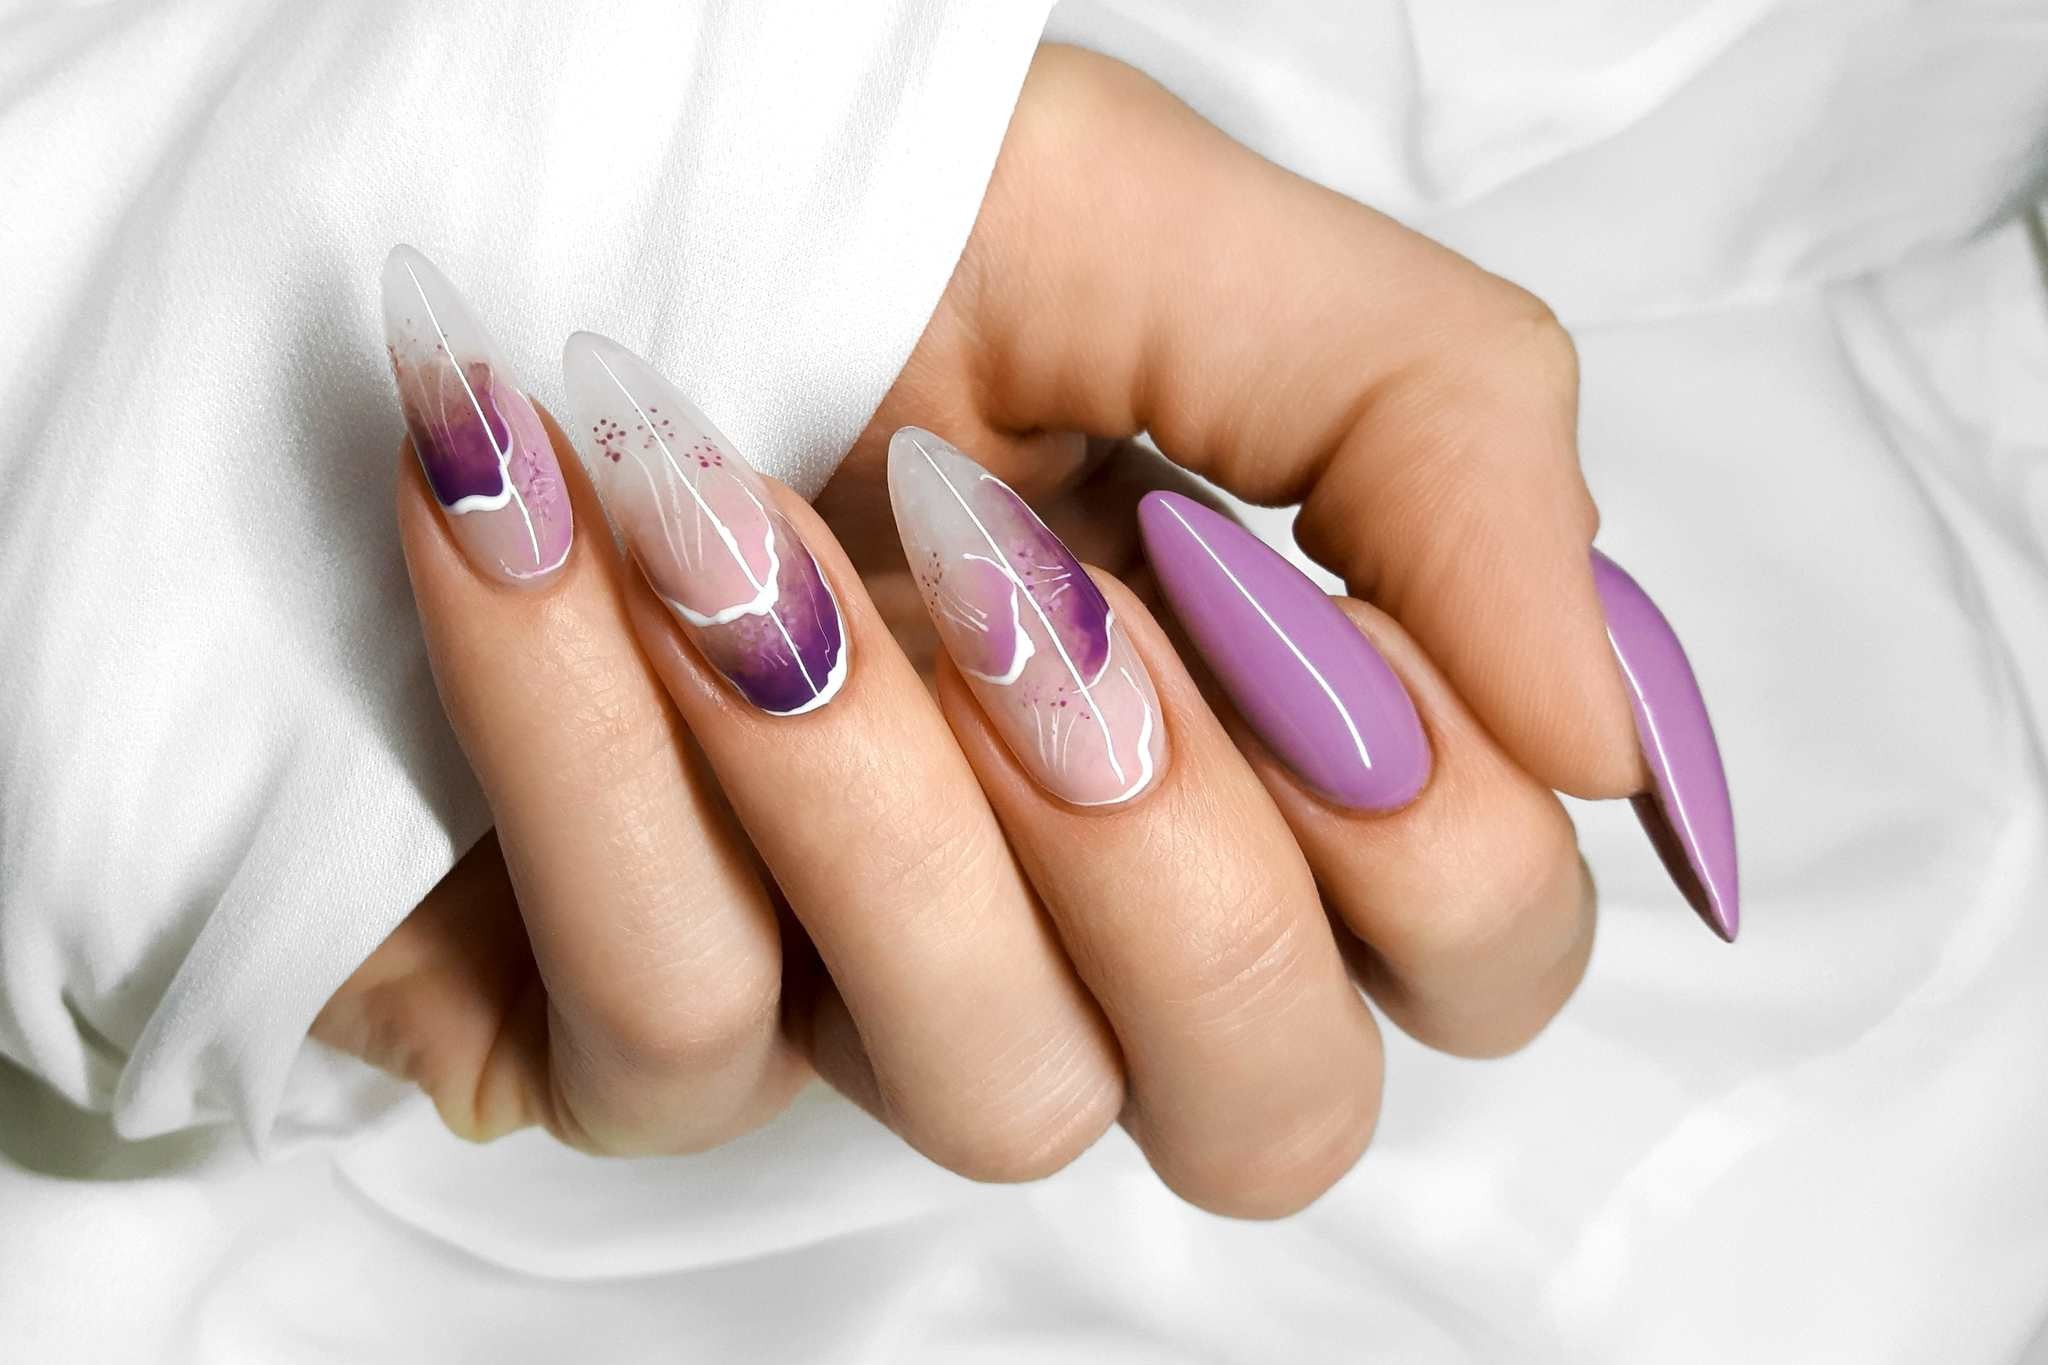 8 Vitamins to Grow Strong Nails |How to Grow Stronger Nails -  everydayzenglow